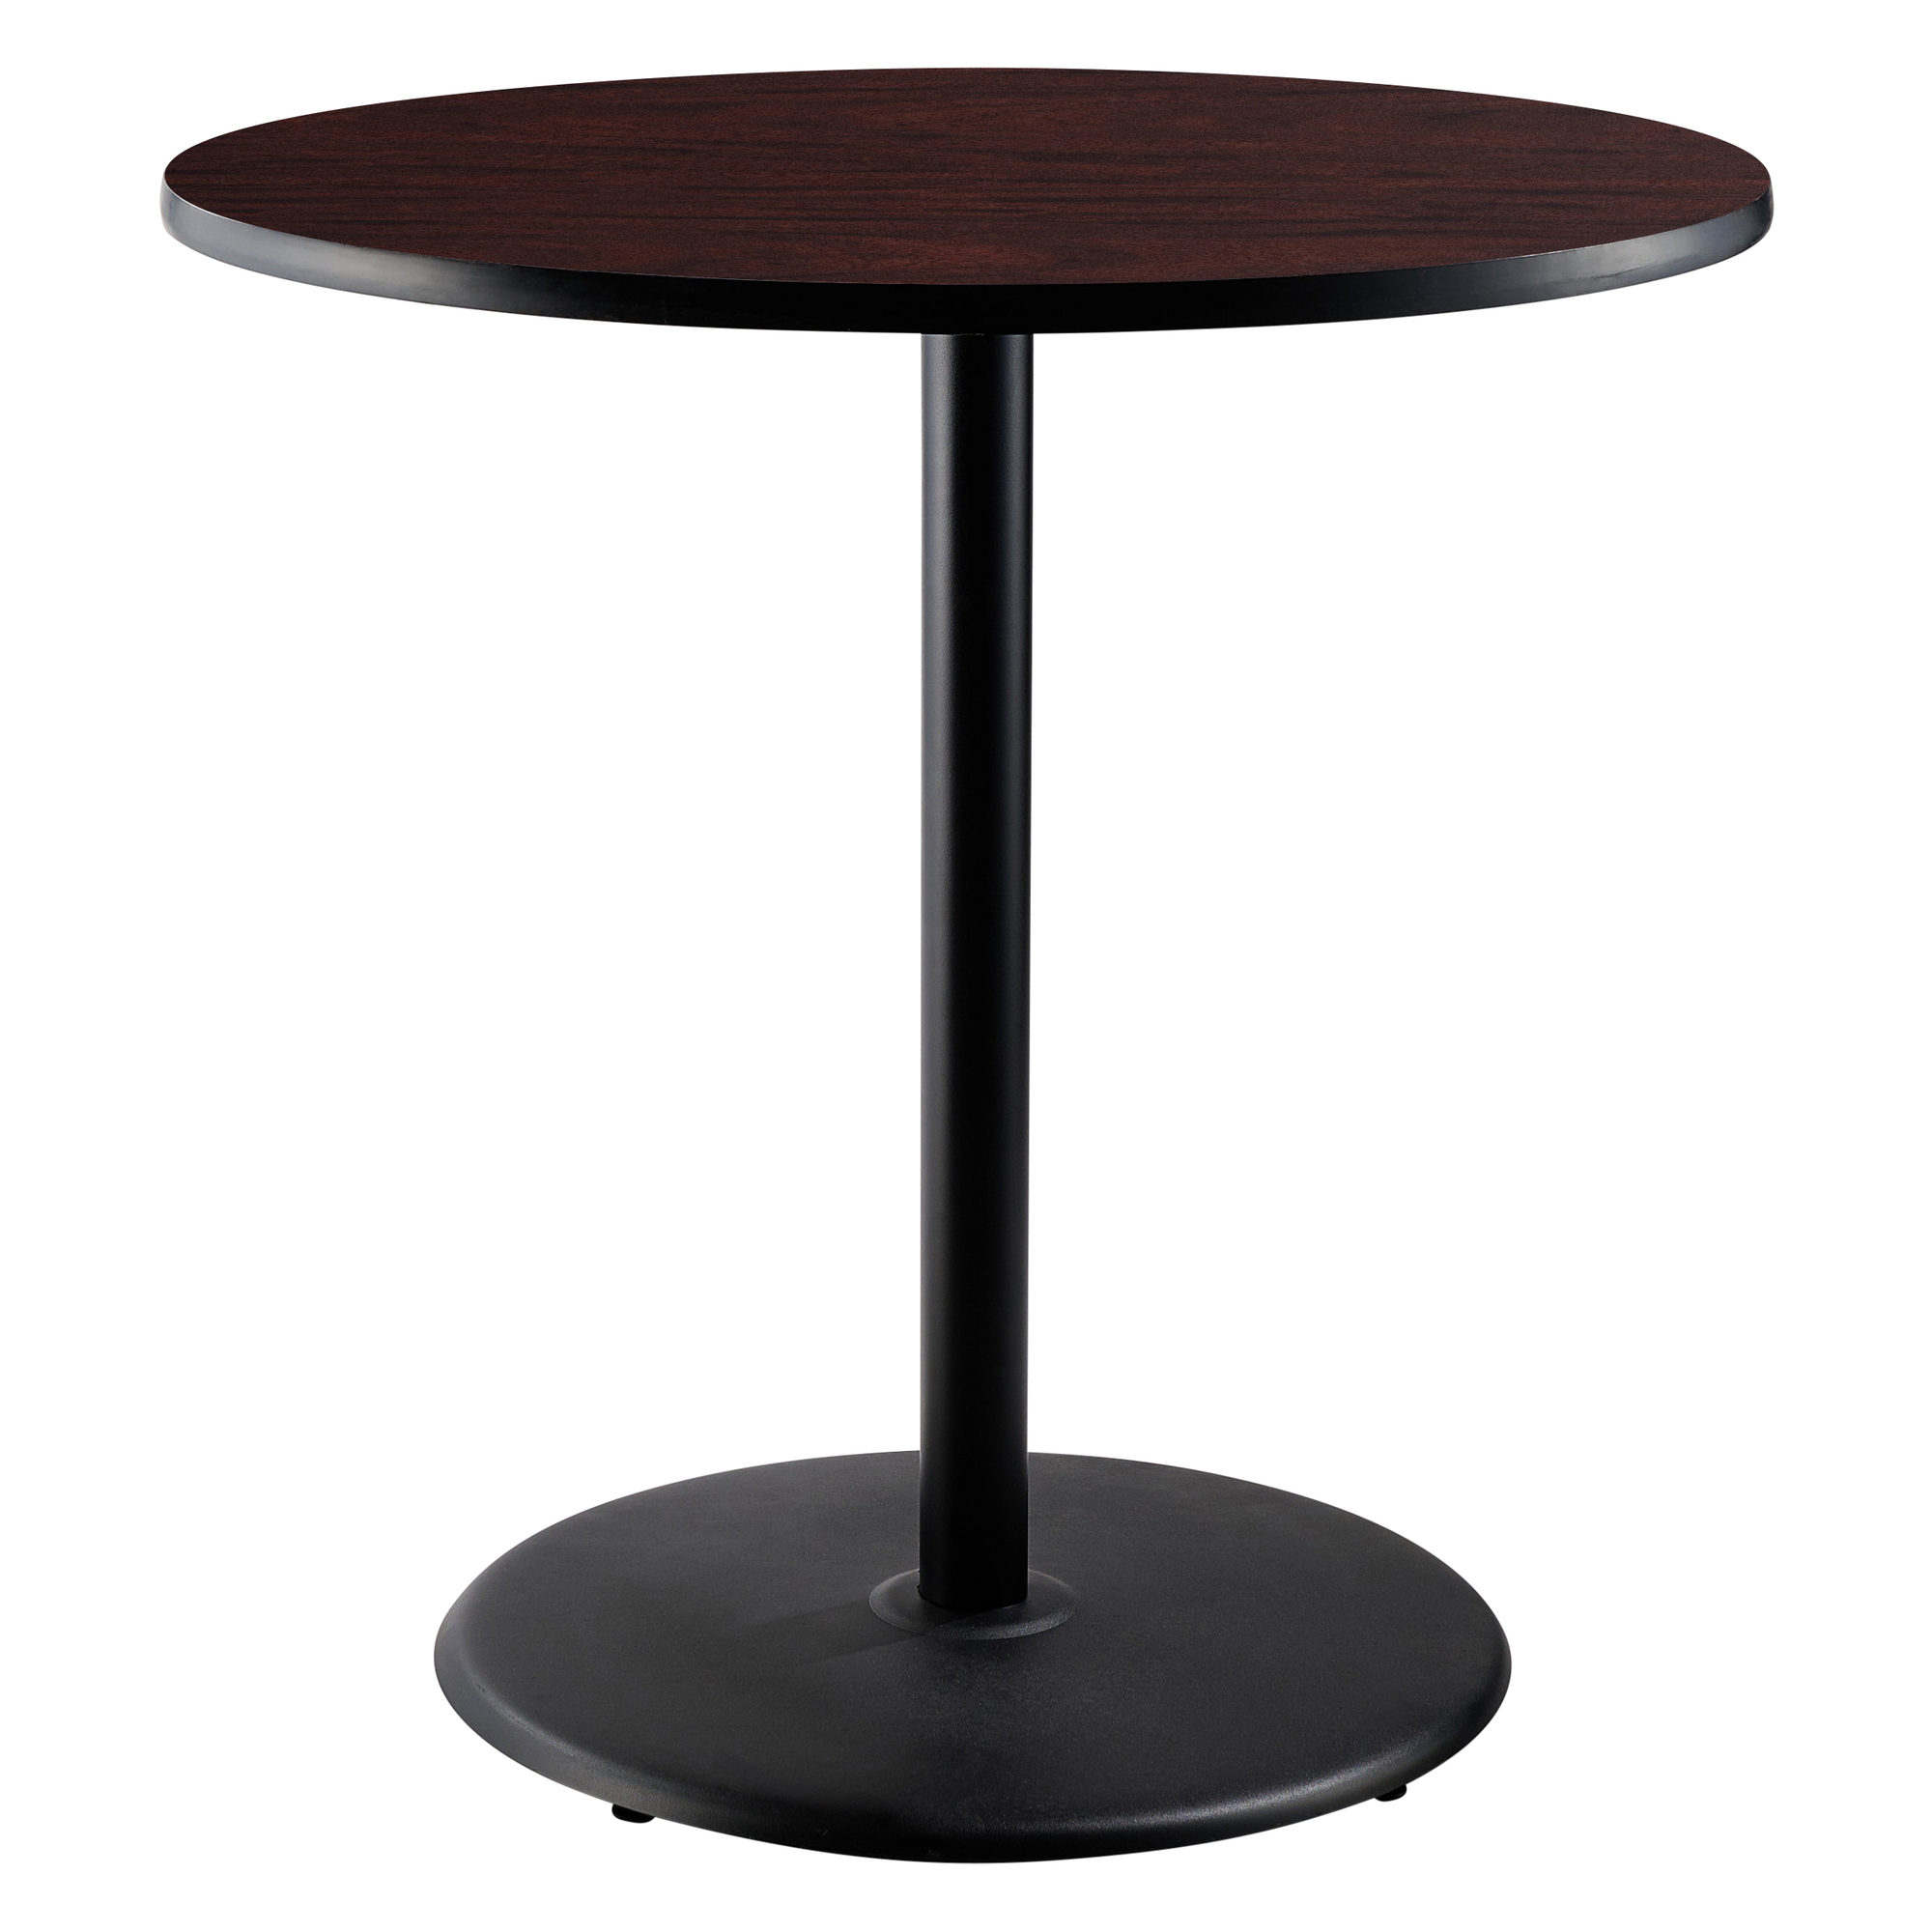 "National Public Seating, Cafe Table, 36x36x42Round ""R"" Base, Height 42 in, Model CT13636RBPBTMMY"